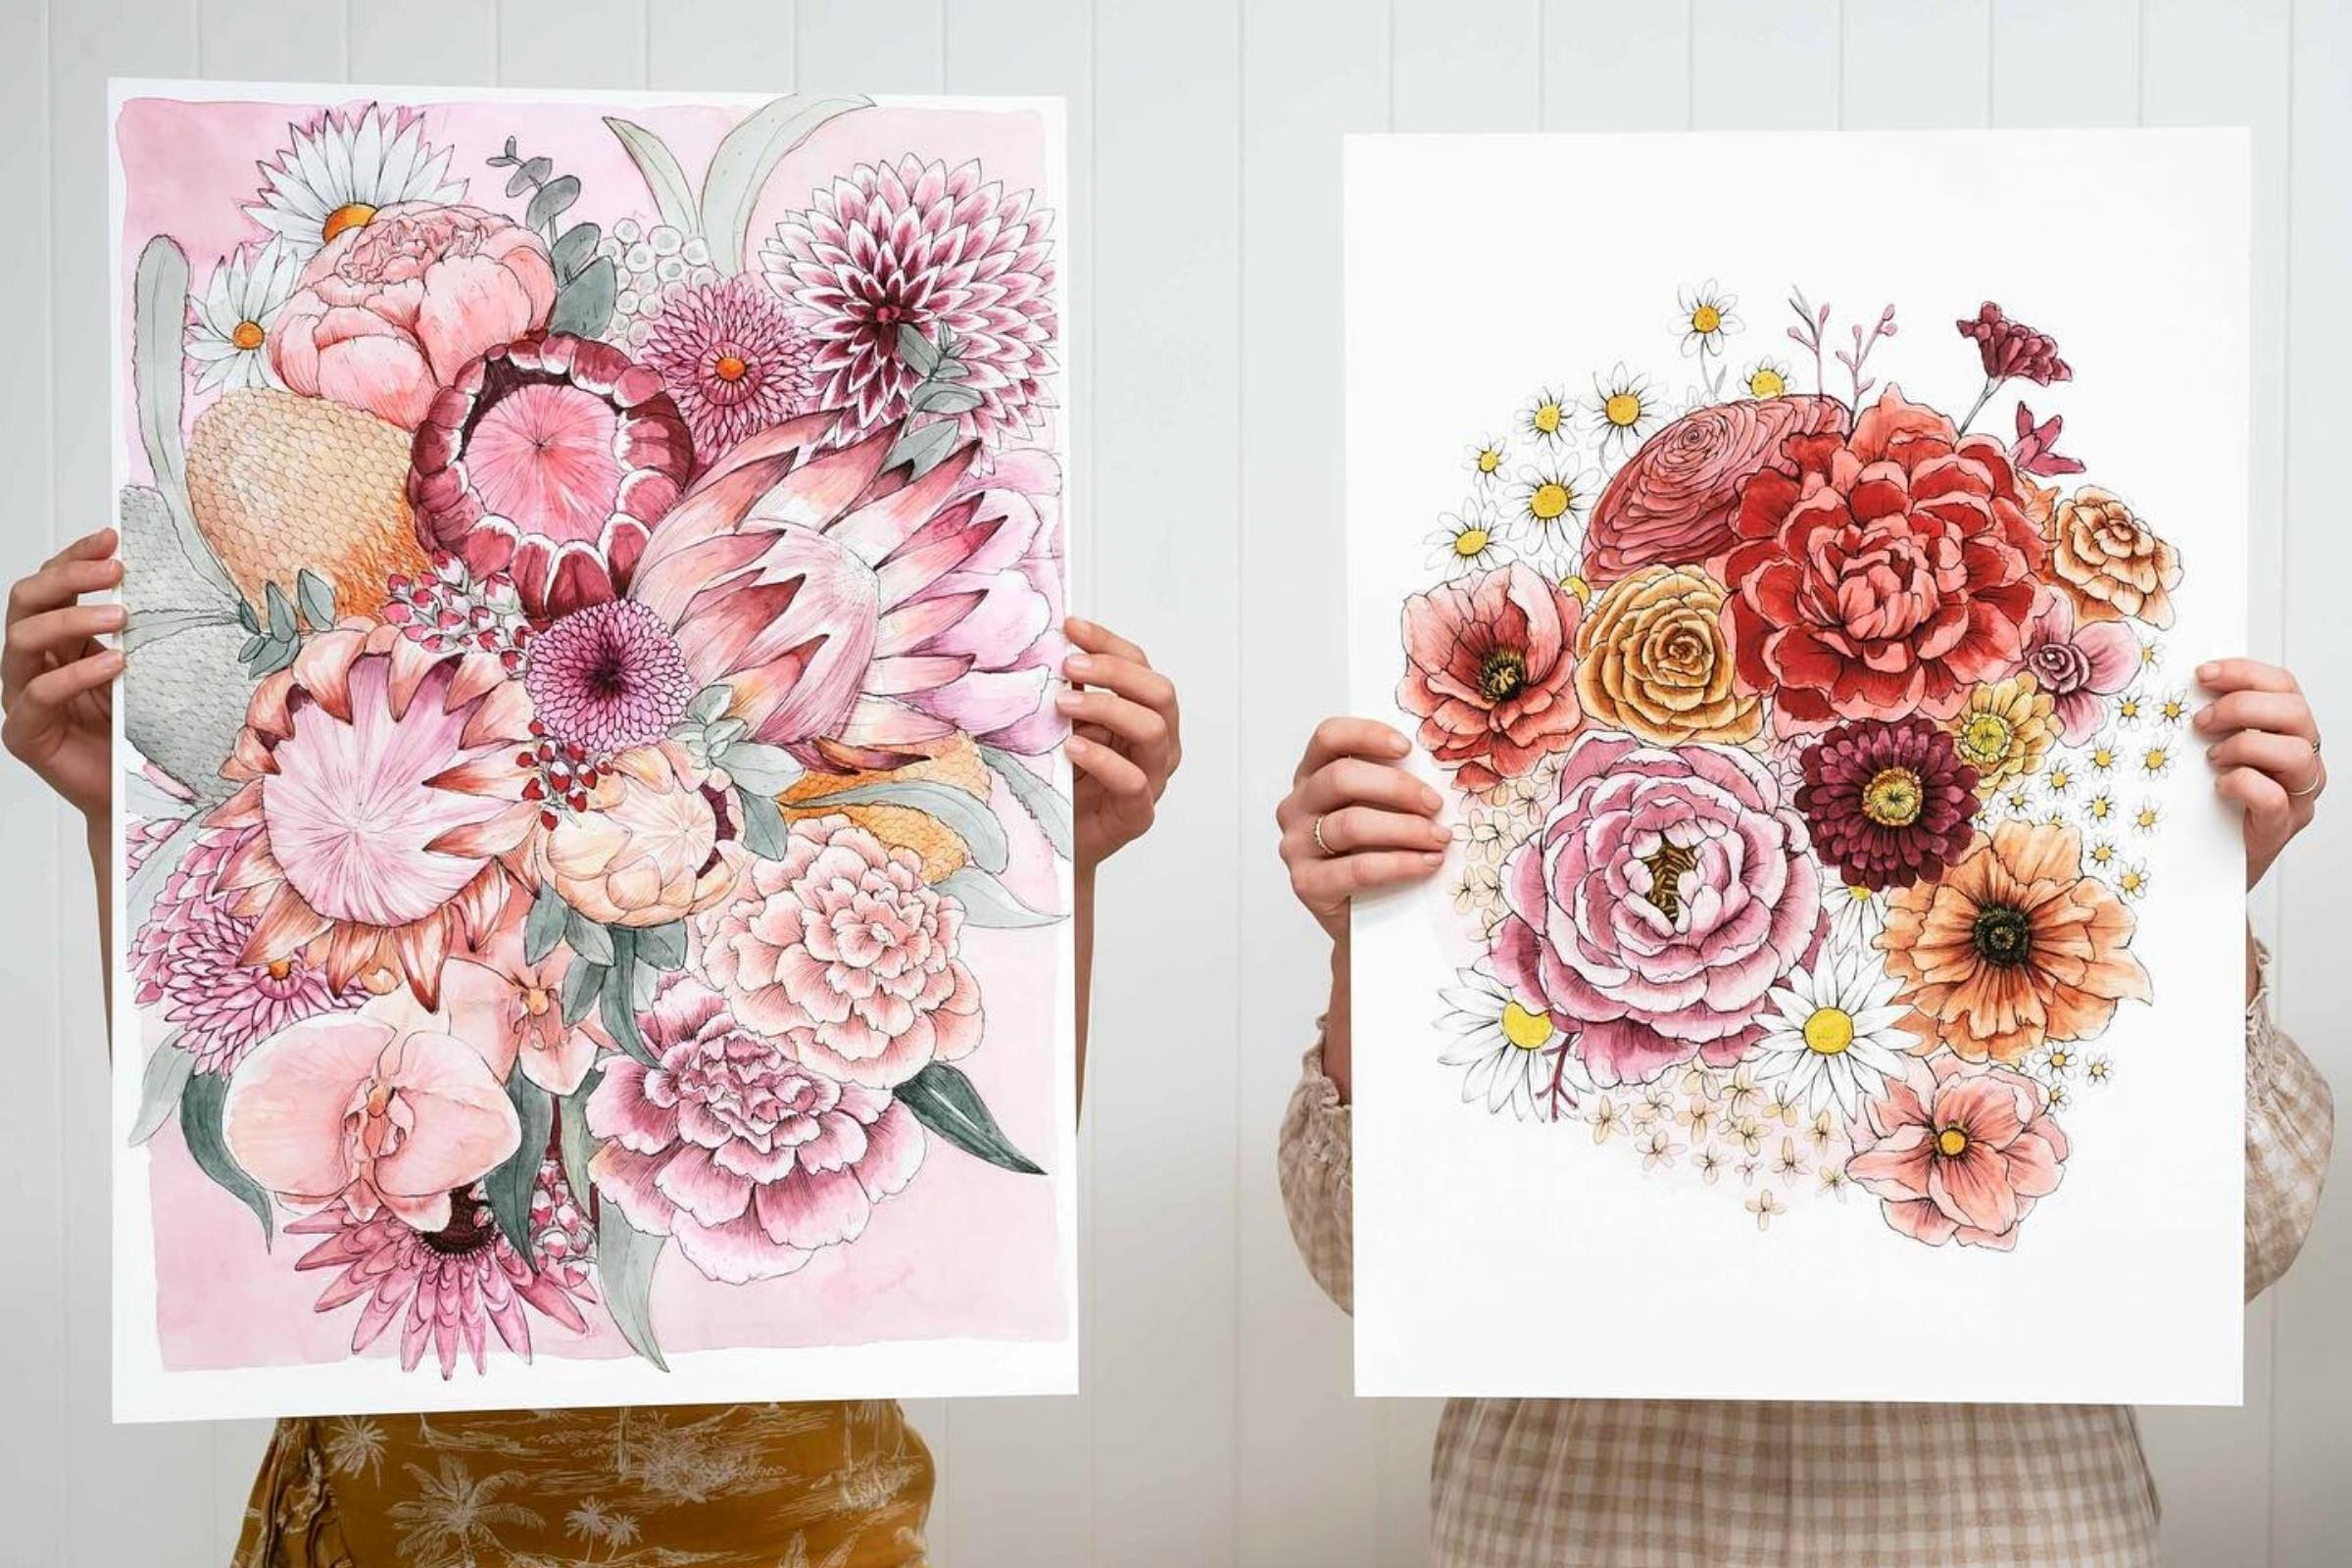 florist-emma-morgan-lets-her-love-for-wildflowers-inspire-her-illustrations-featured